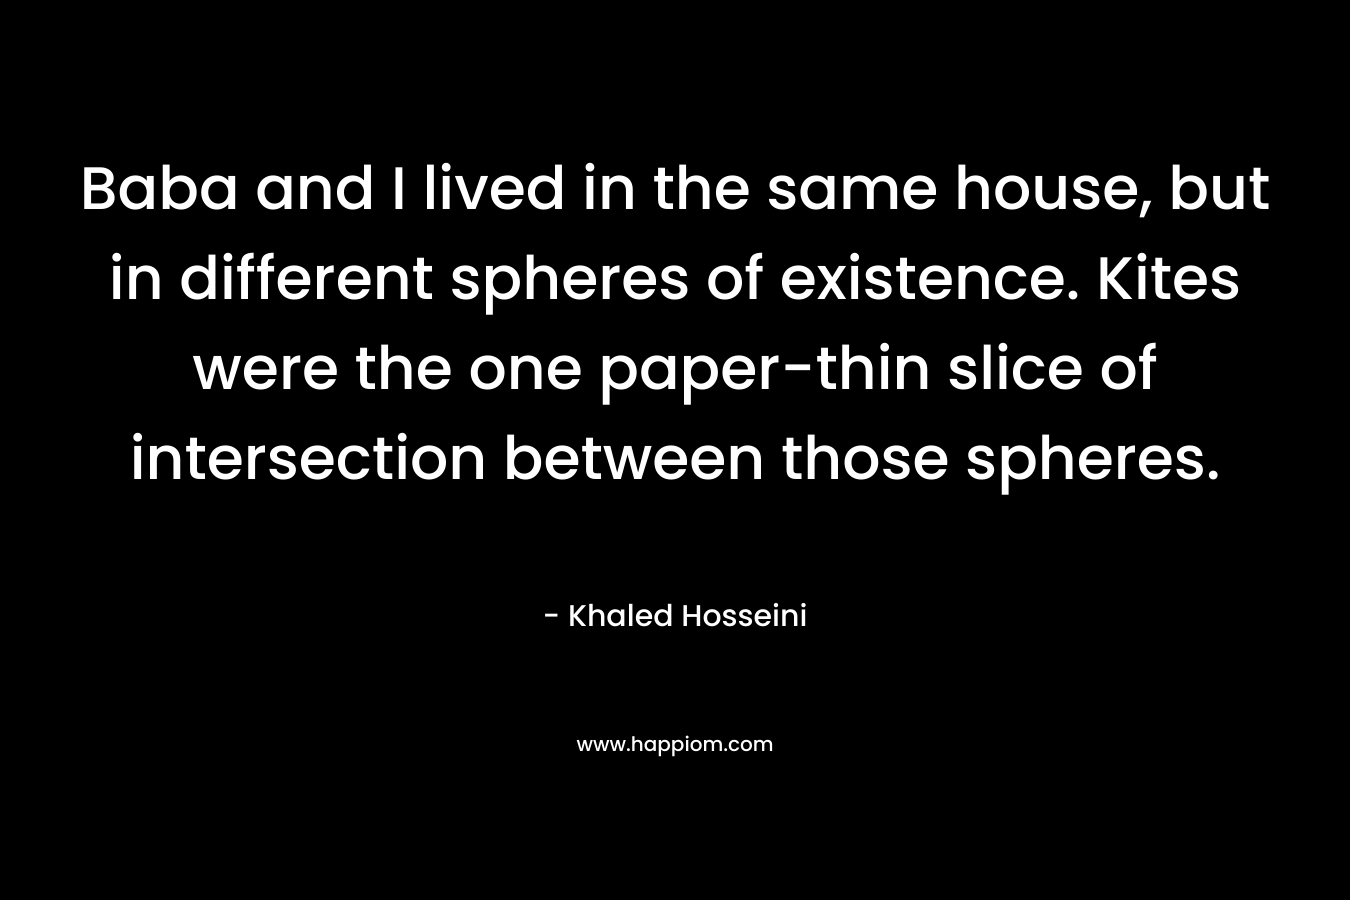 Baba and I lived in the same house, but in different spheres of existence. Kites were the one paper-thin slice of intersection between those spheres. – Khaled Hosseini